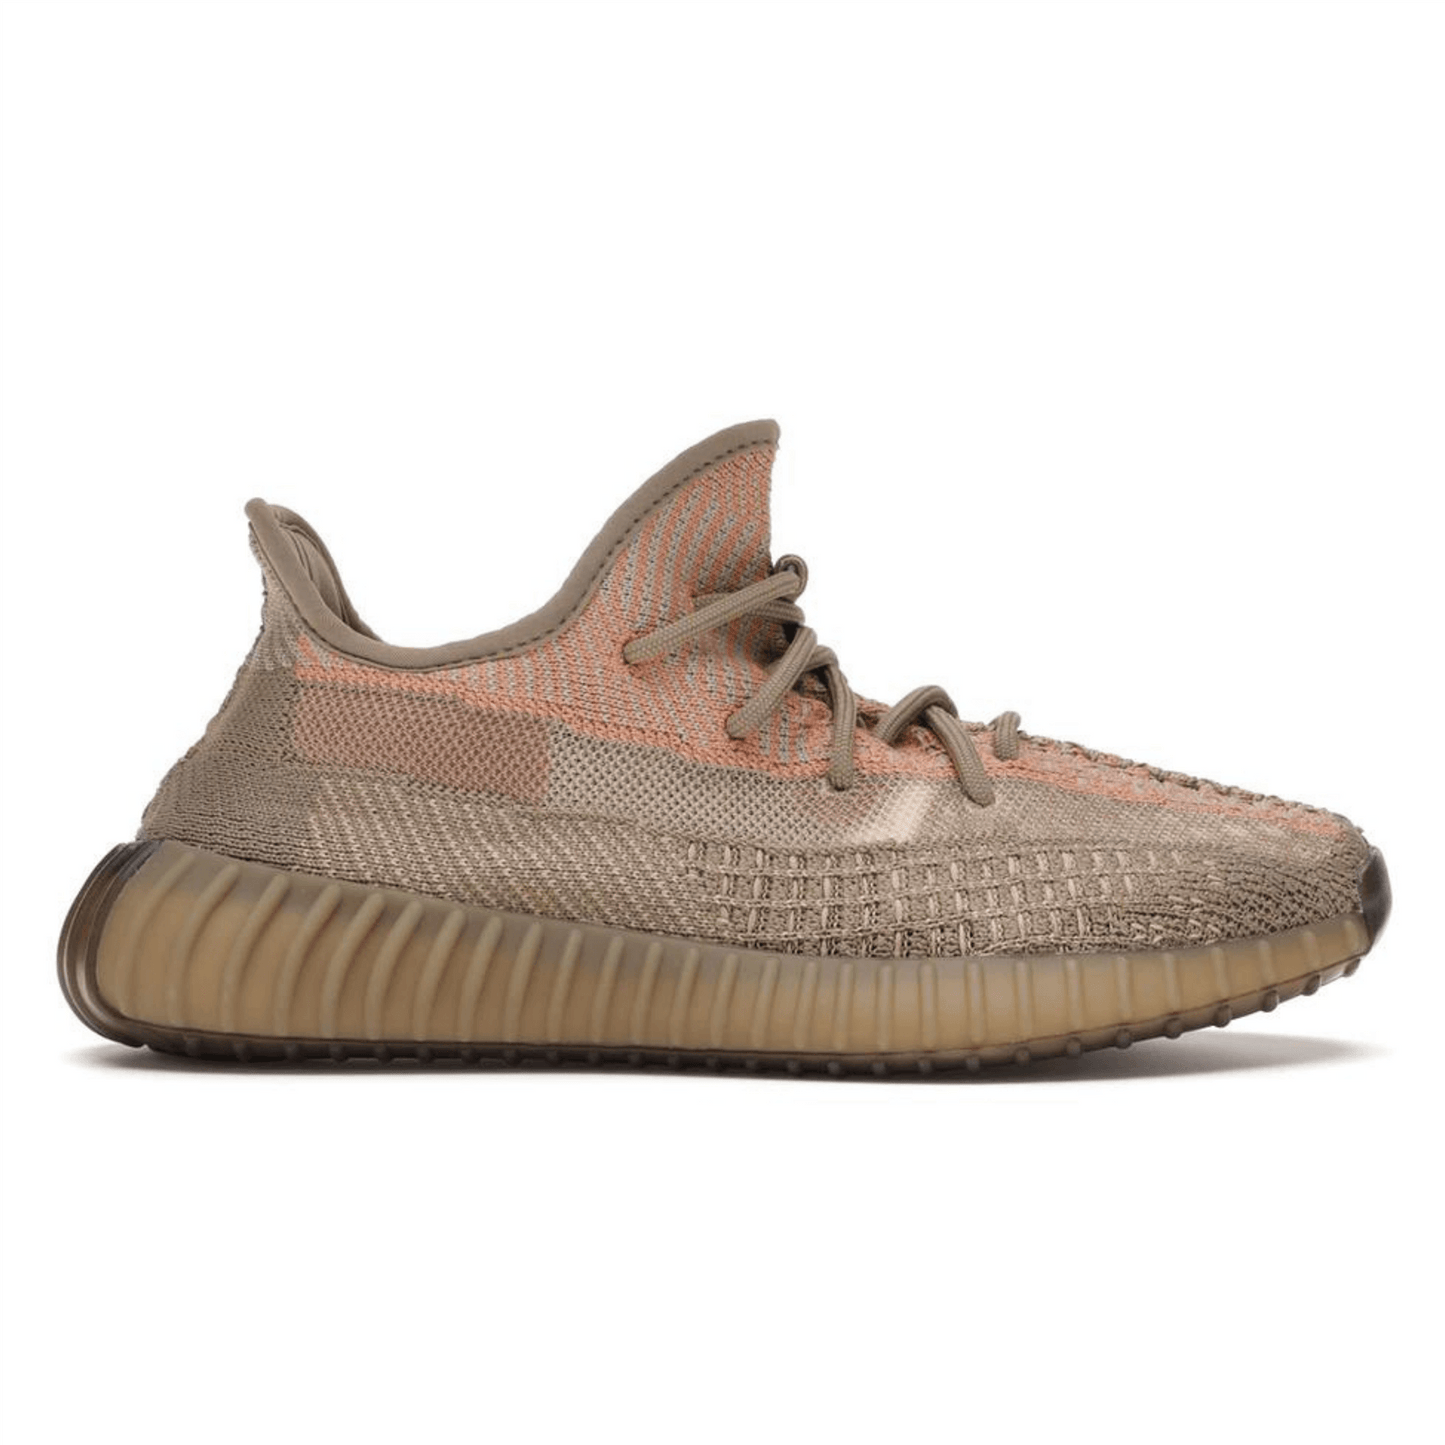 Yeezy Boost 350 V2 'Sand Taupe' - FRESNEAKERS